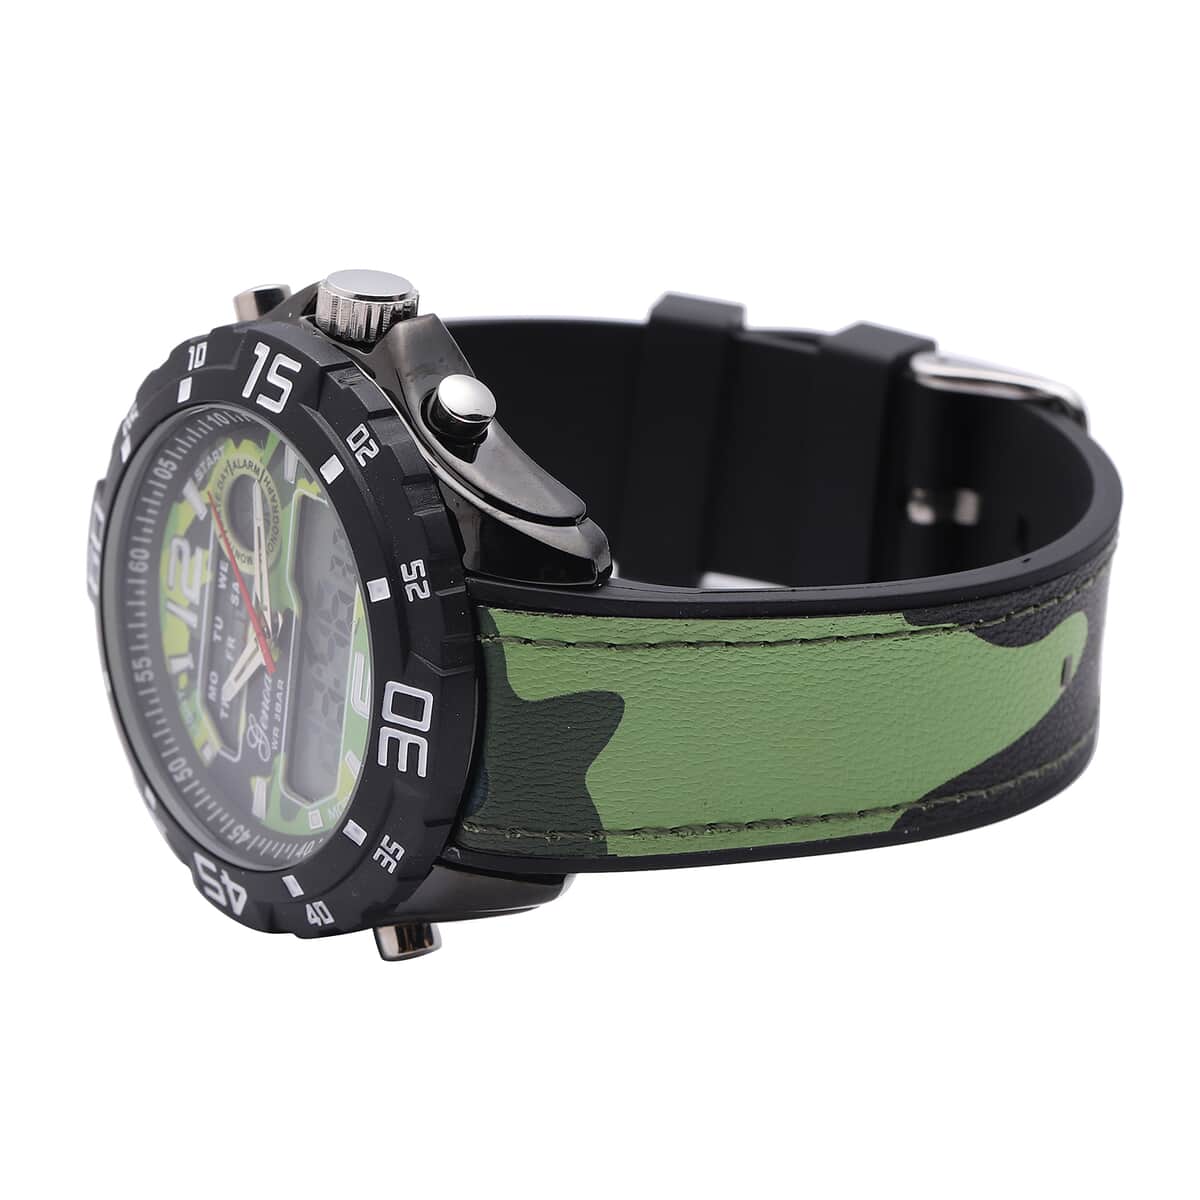 Genoa Japanese and Electronic Movement Multifunctional Key Watch with Camouflage Green Silicone Strap image number 3